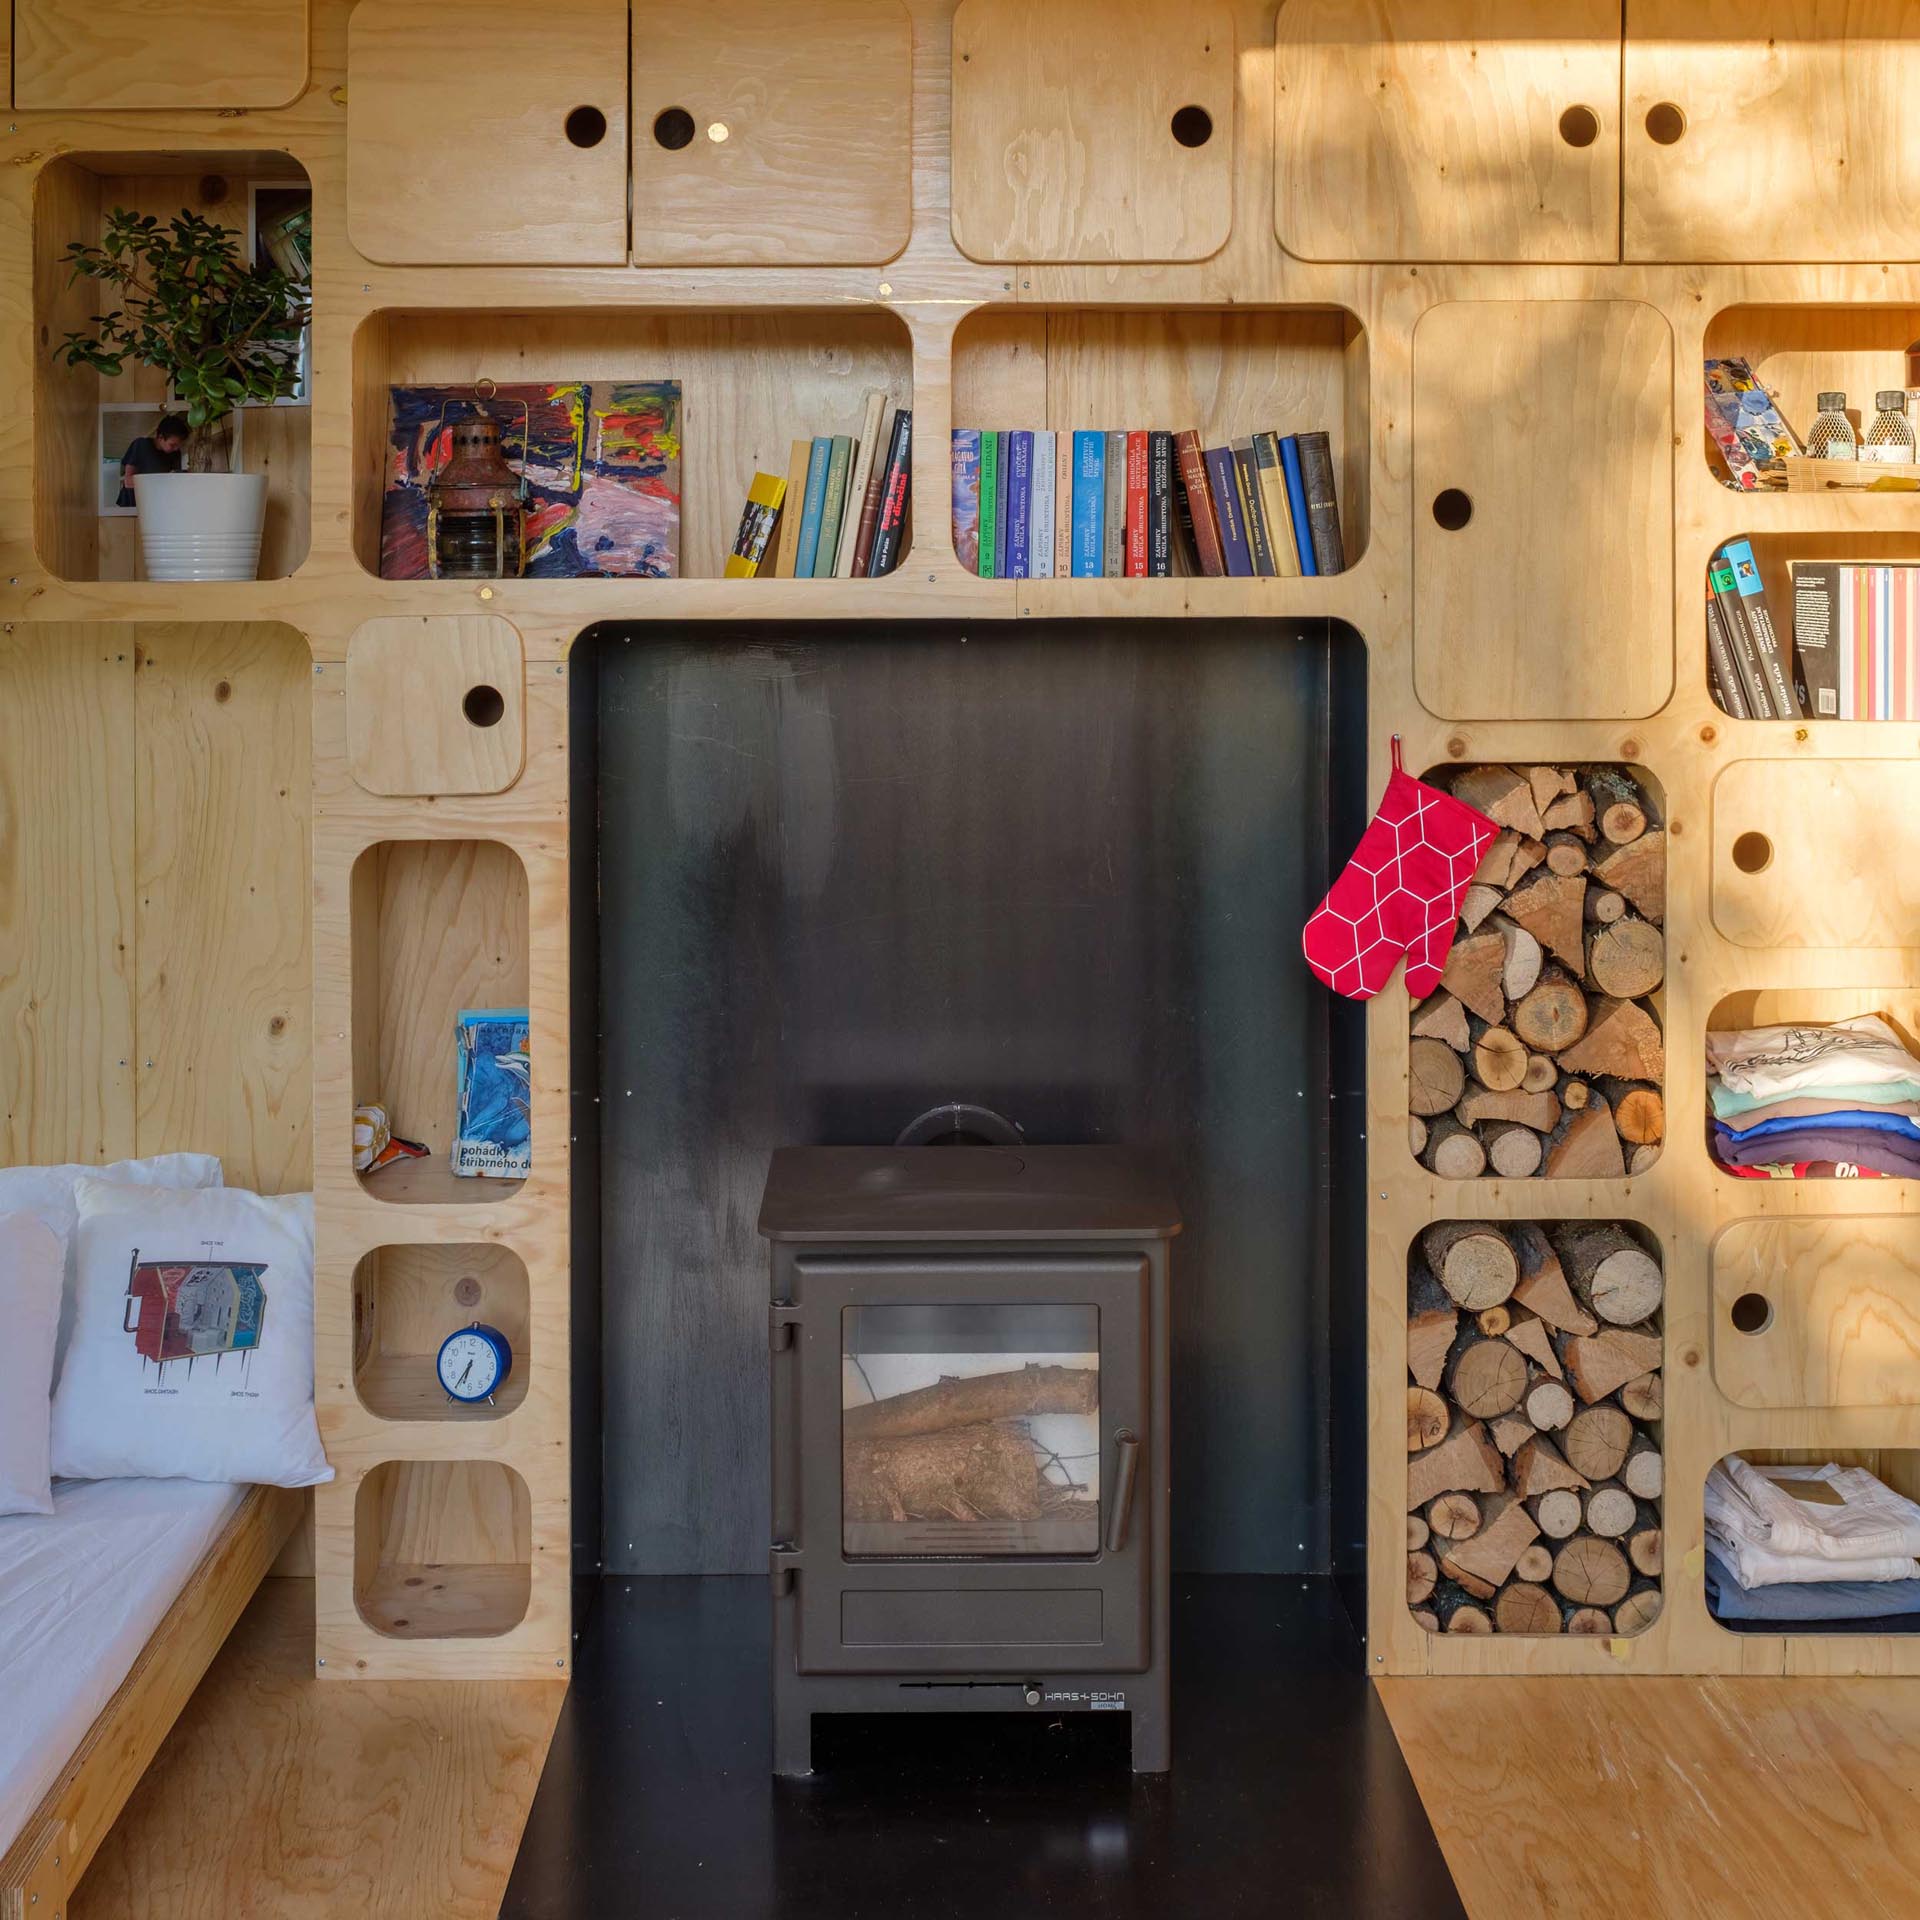 A tiny home made from a shipping container has a fold-down bed, plenty of storage cabinets, and a fireplace.